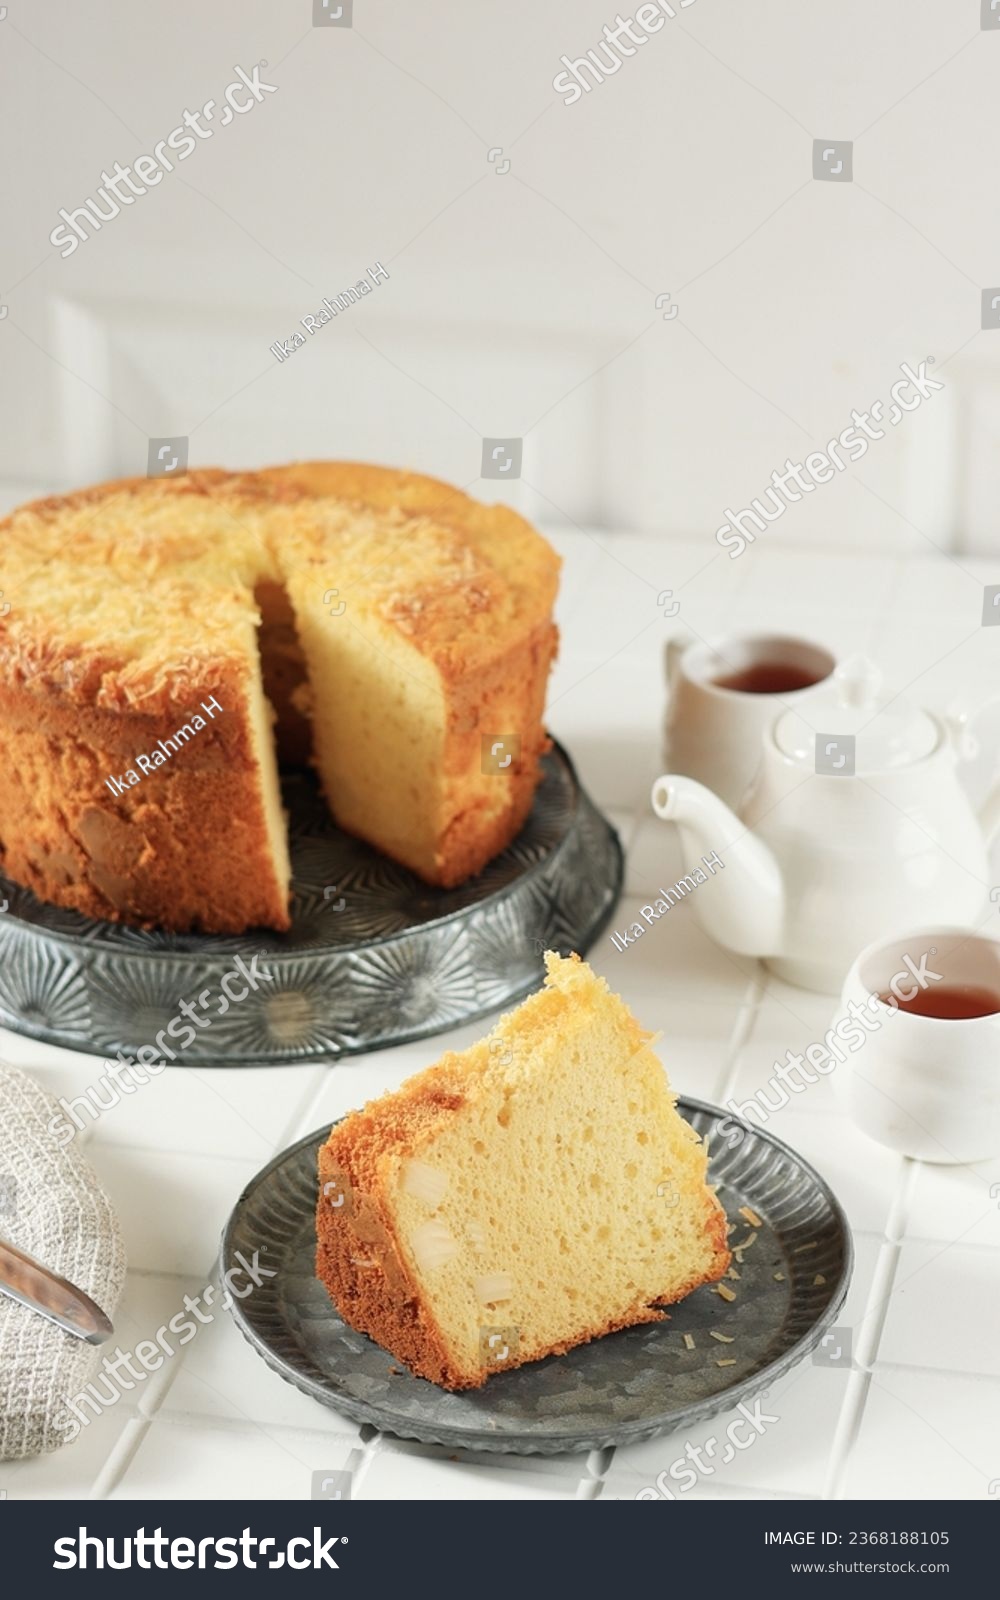 Soft and Fluffy Cheese Chiffon Cake on White Table  #2368188105